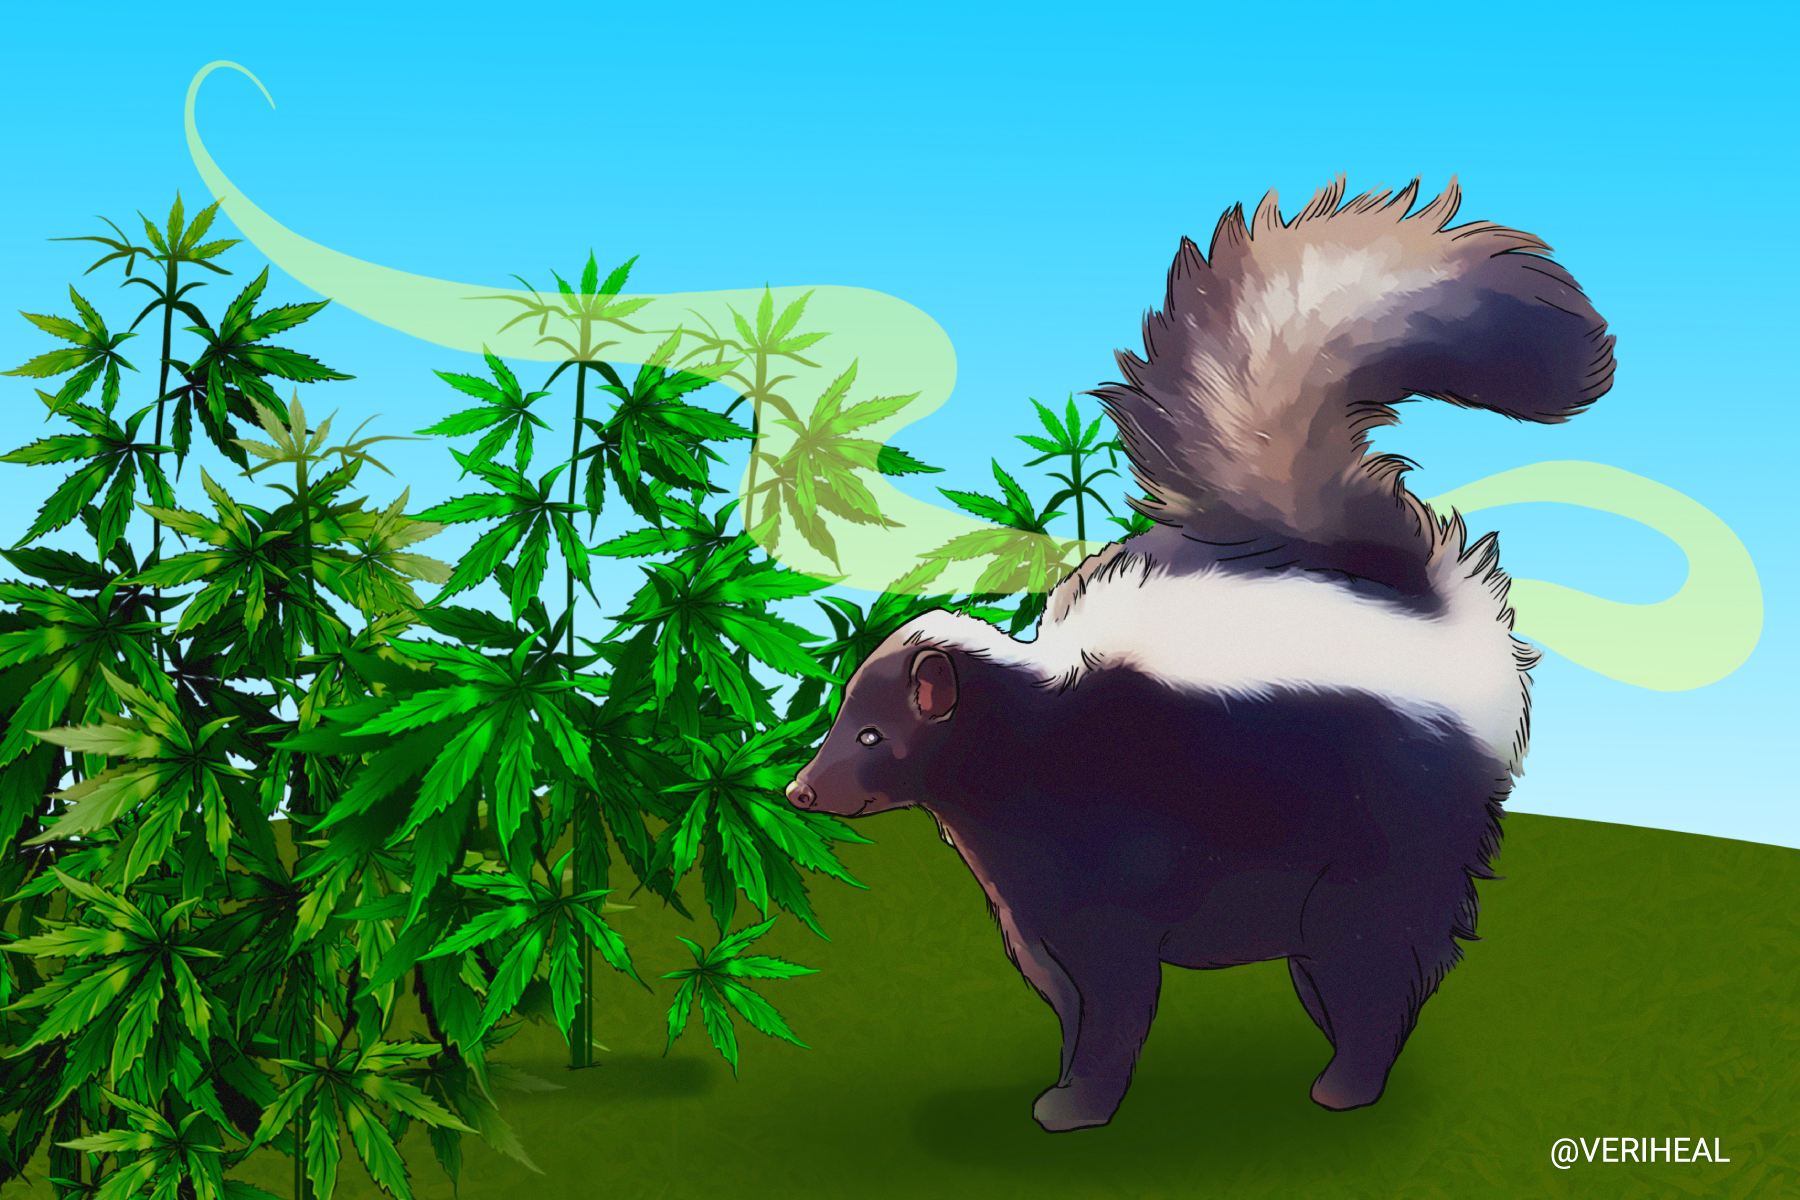 Researchers May Have Discovered the Cause of the Skunky Smell from Cannabis